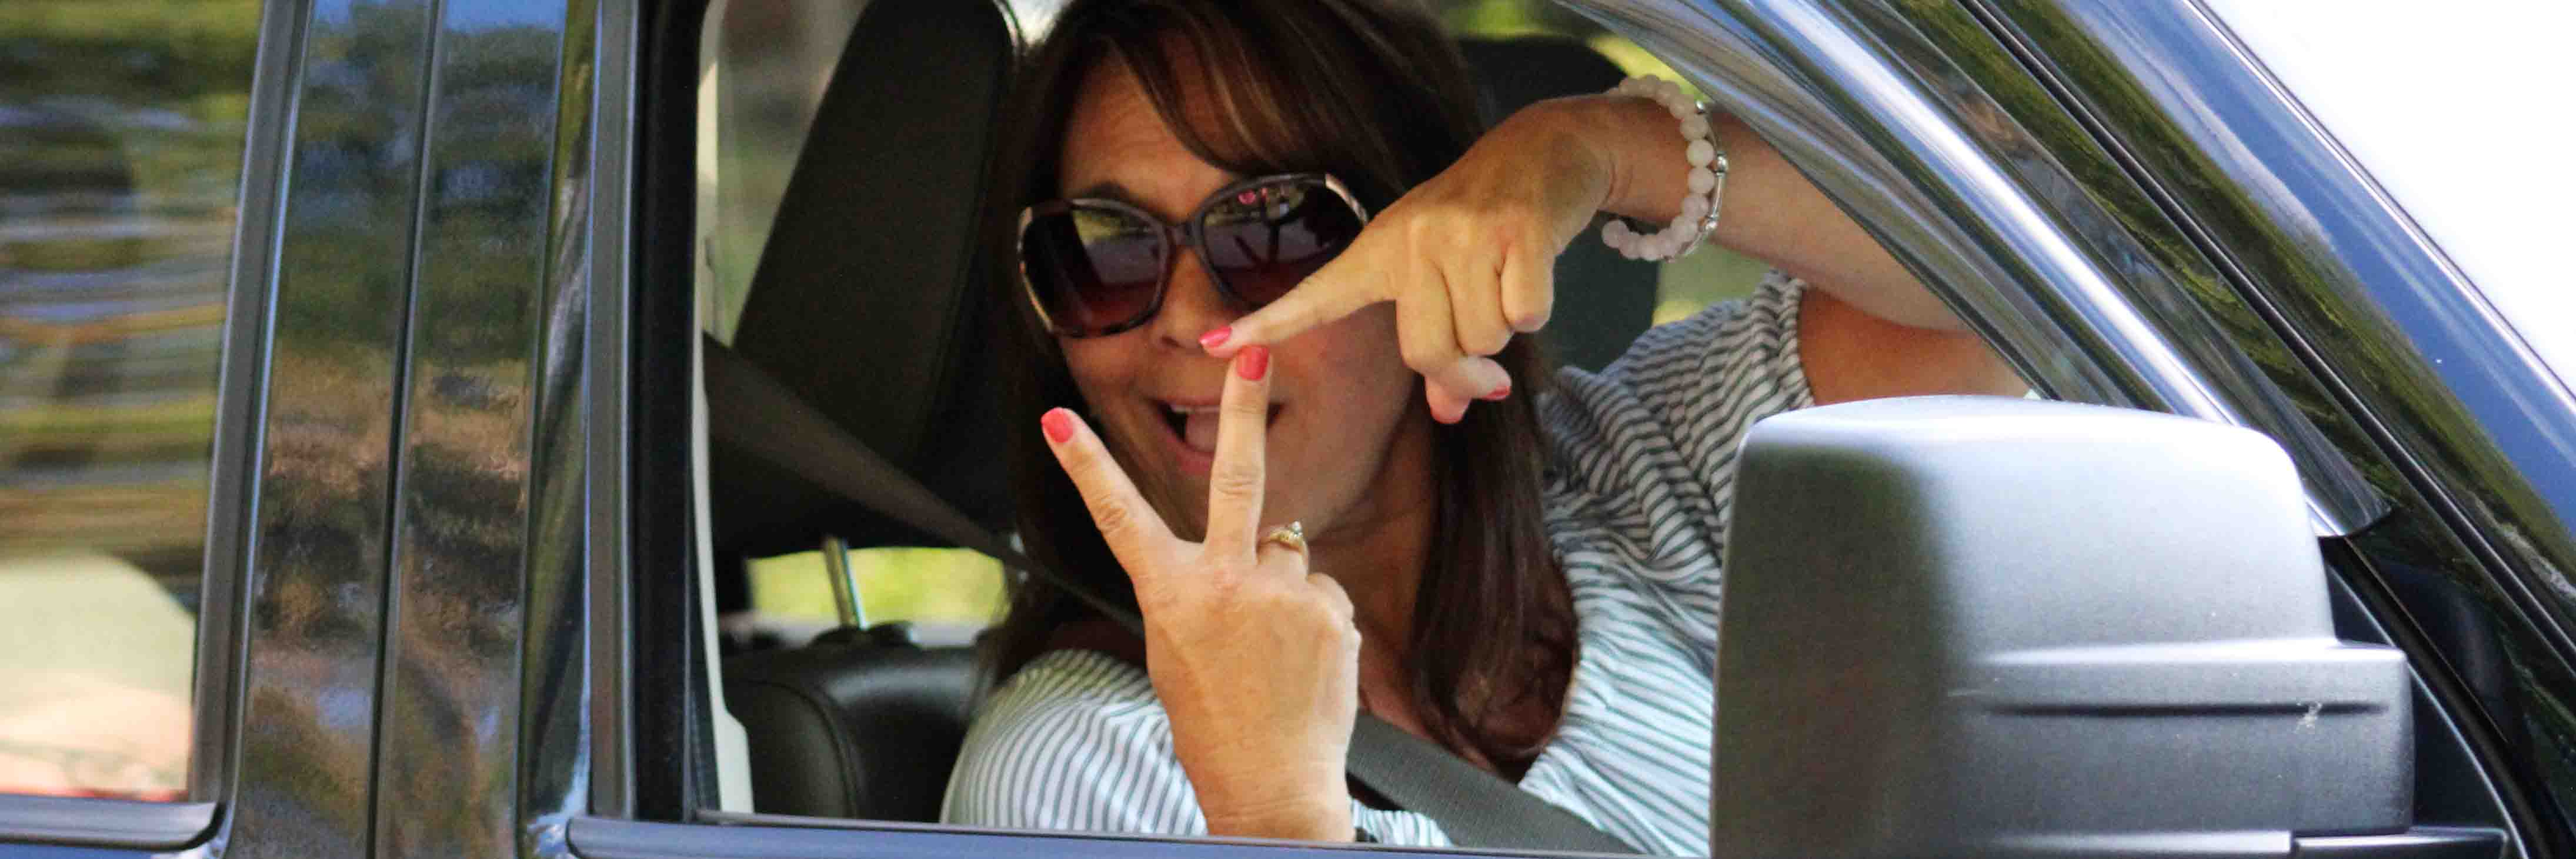 A woman in sunglasses showing the VT hand sign through a vehicle window